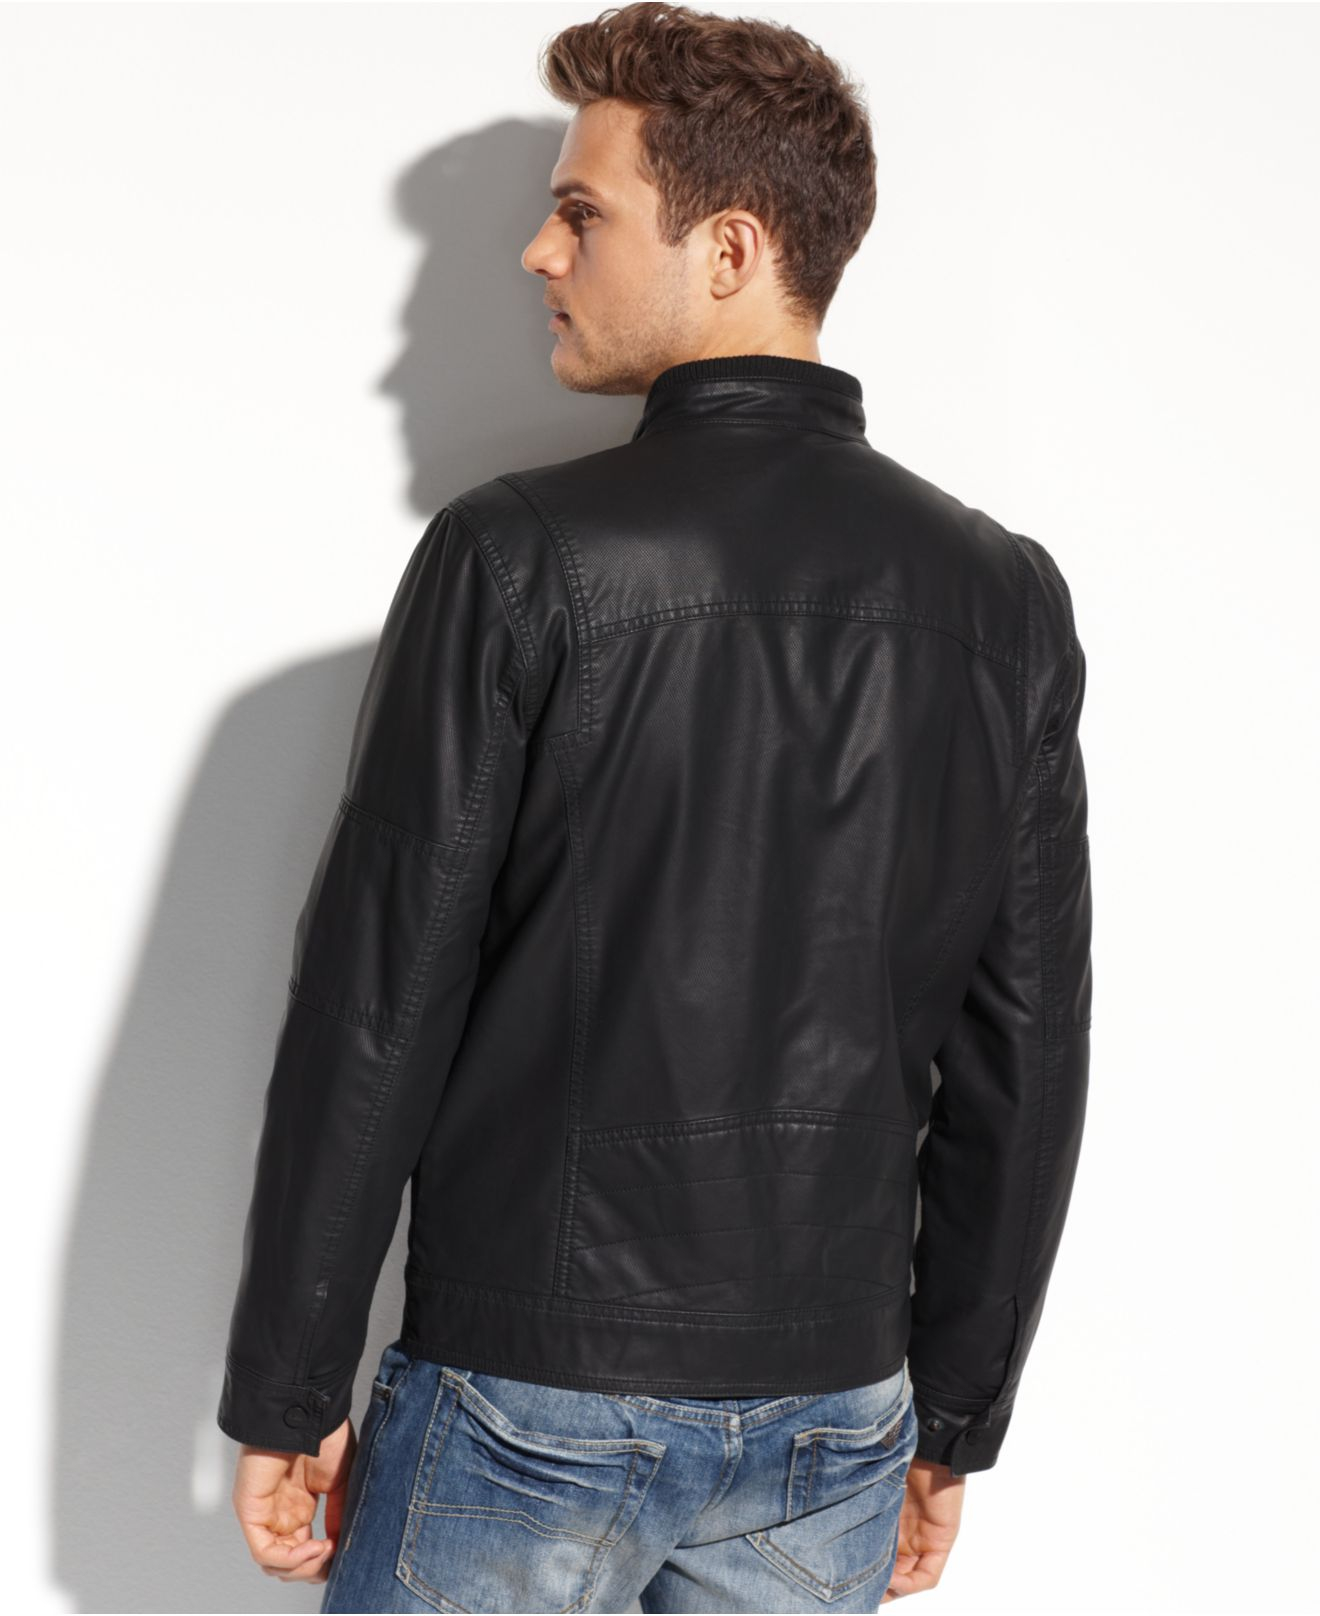 Guess Coats, Lightweight Faux Leather Moto Jacket in Black for Men - Lyst